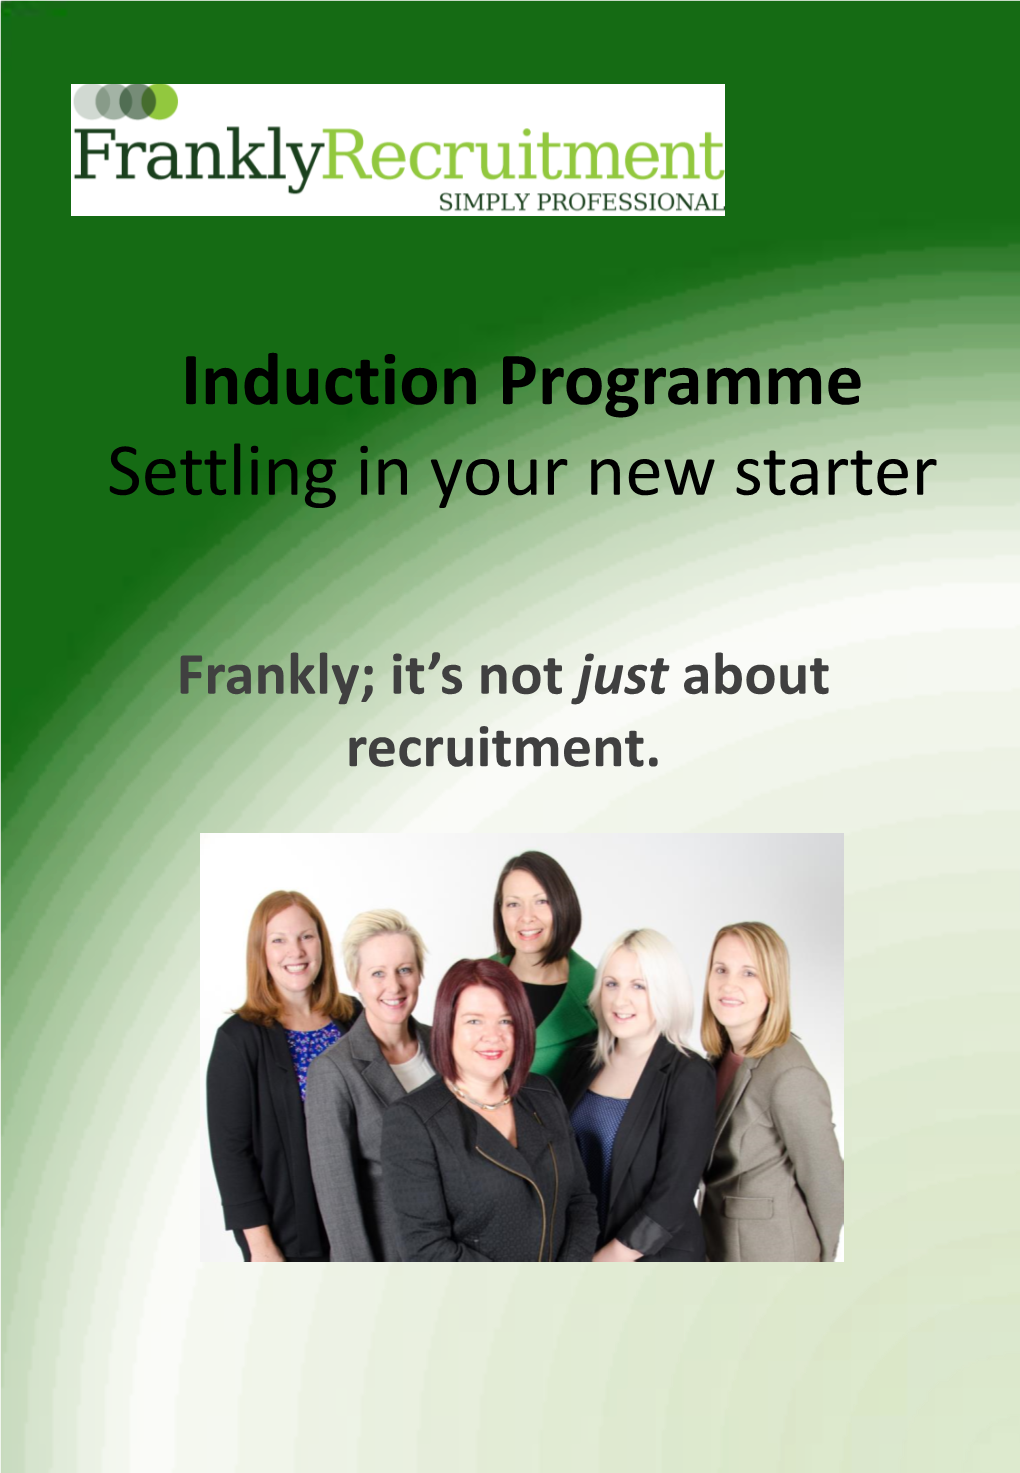 Induction Programme Settling in Your New Starter